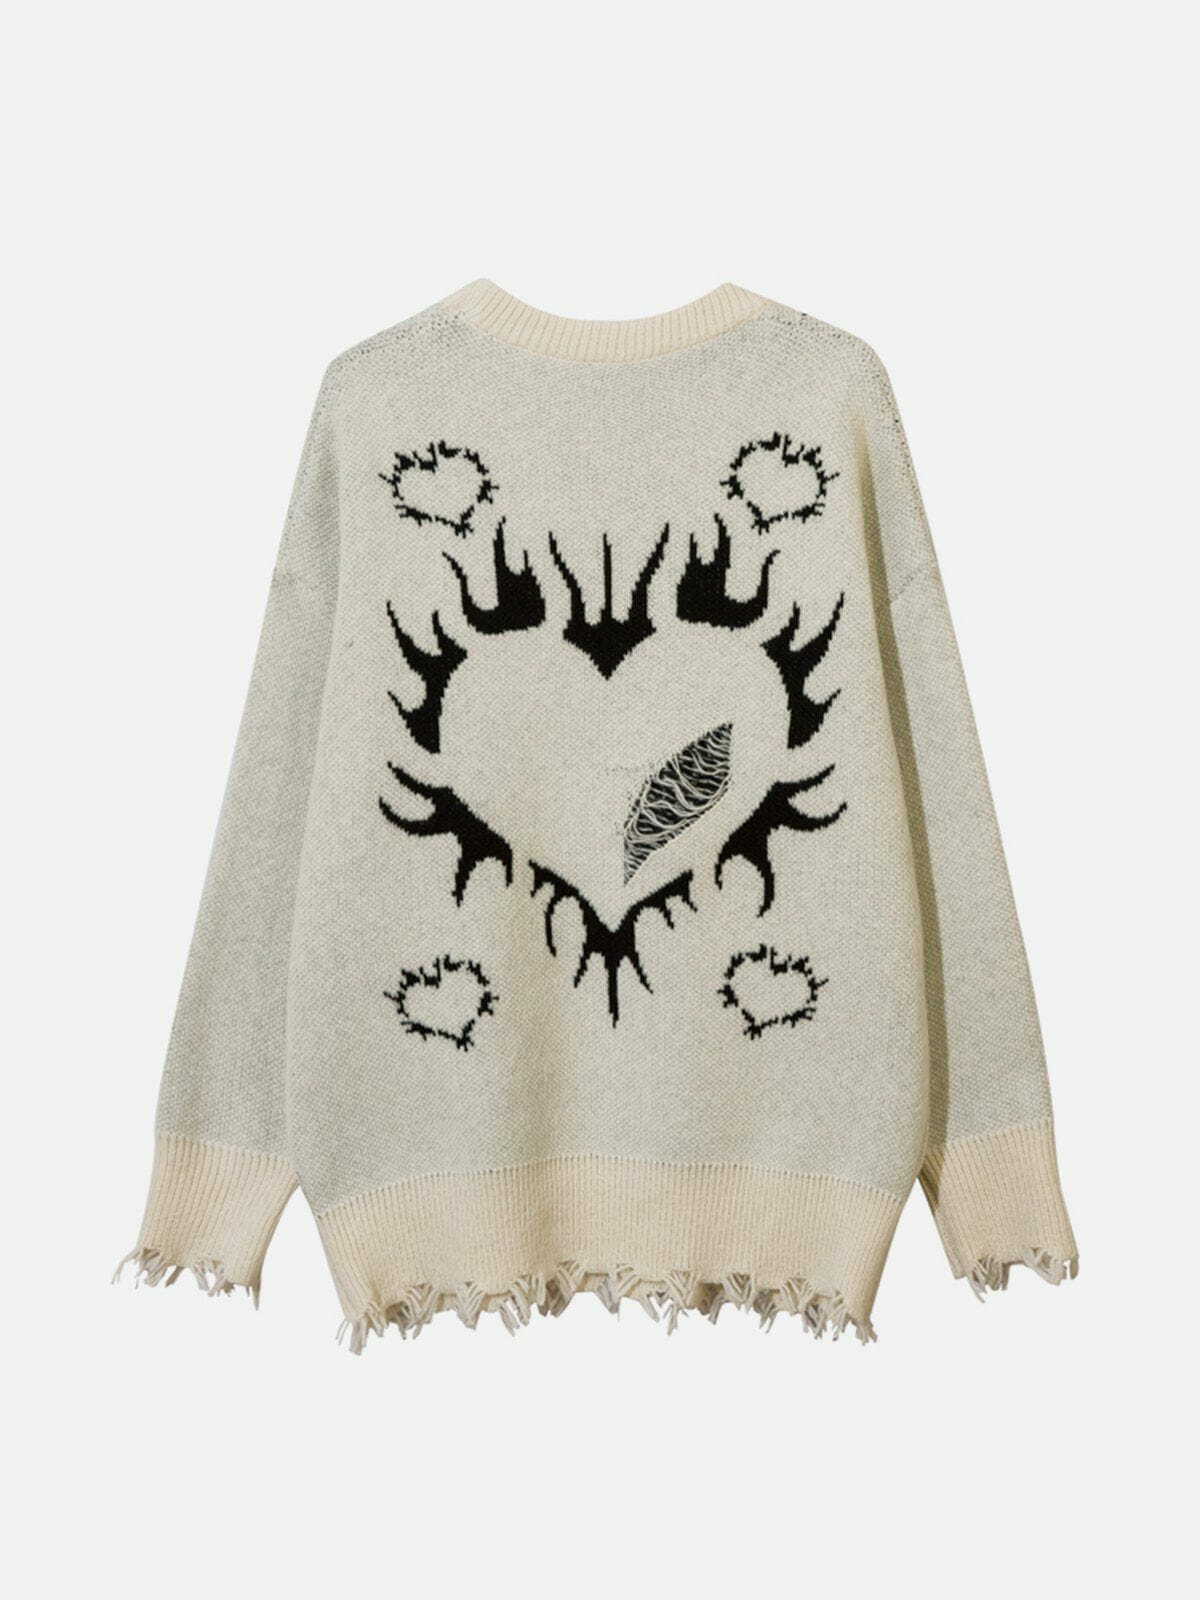 flame heart jacquard sweater edgy retro knitwear chic 7166